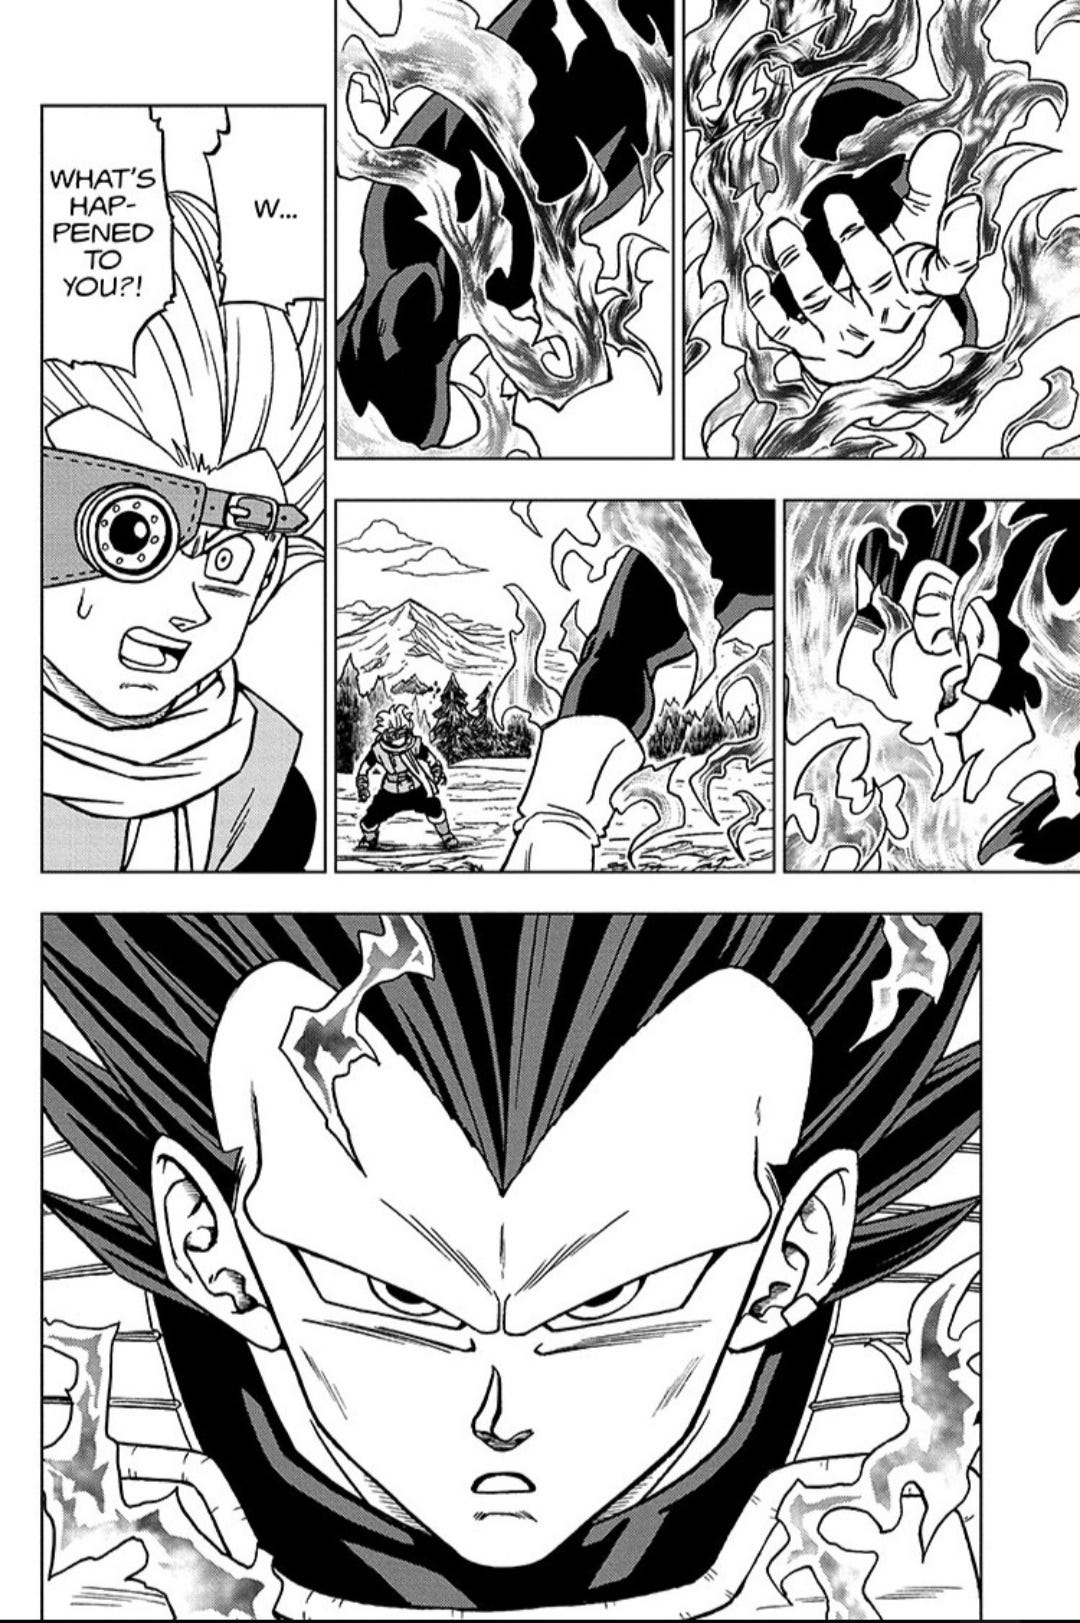 Dragon Ball Super Manga Chapter 74 Page by Page Review! Prince of